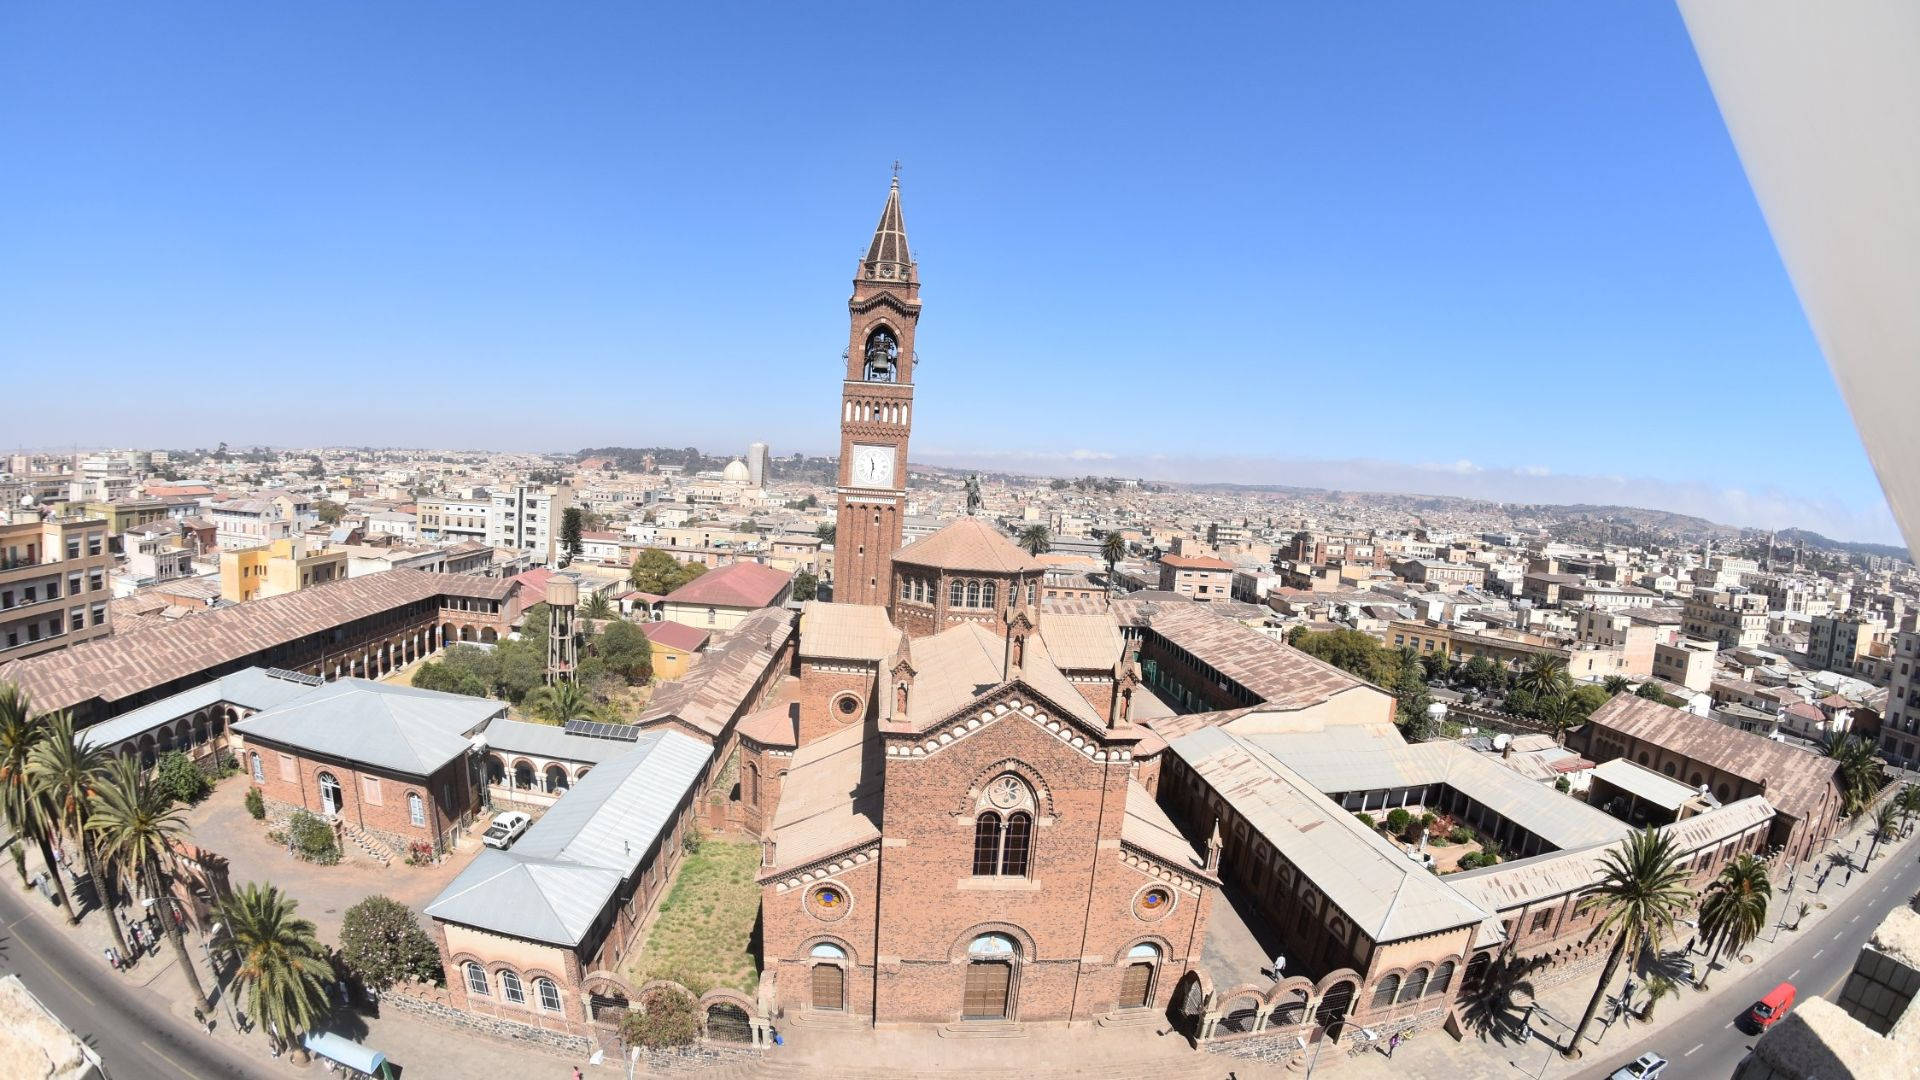 Eritrea Church View From Sky Background